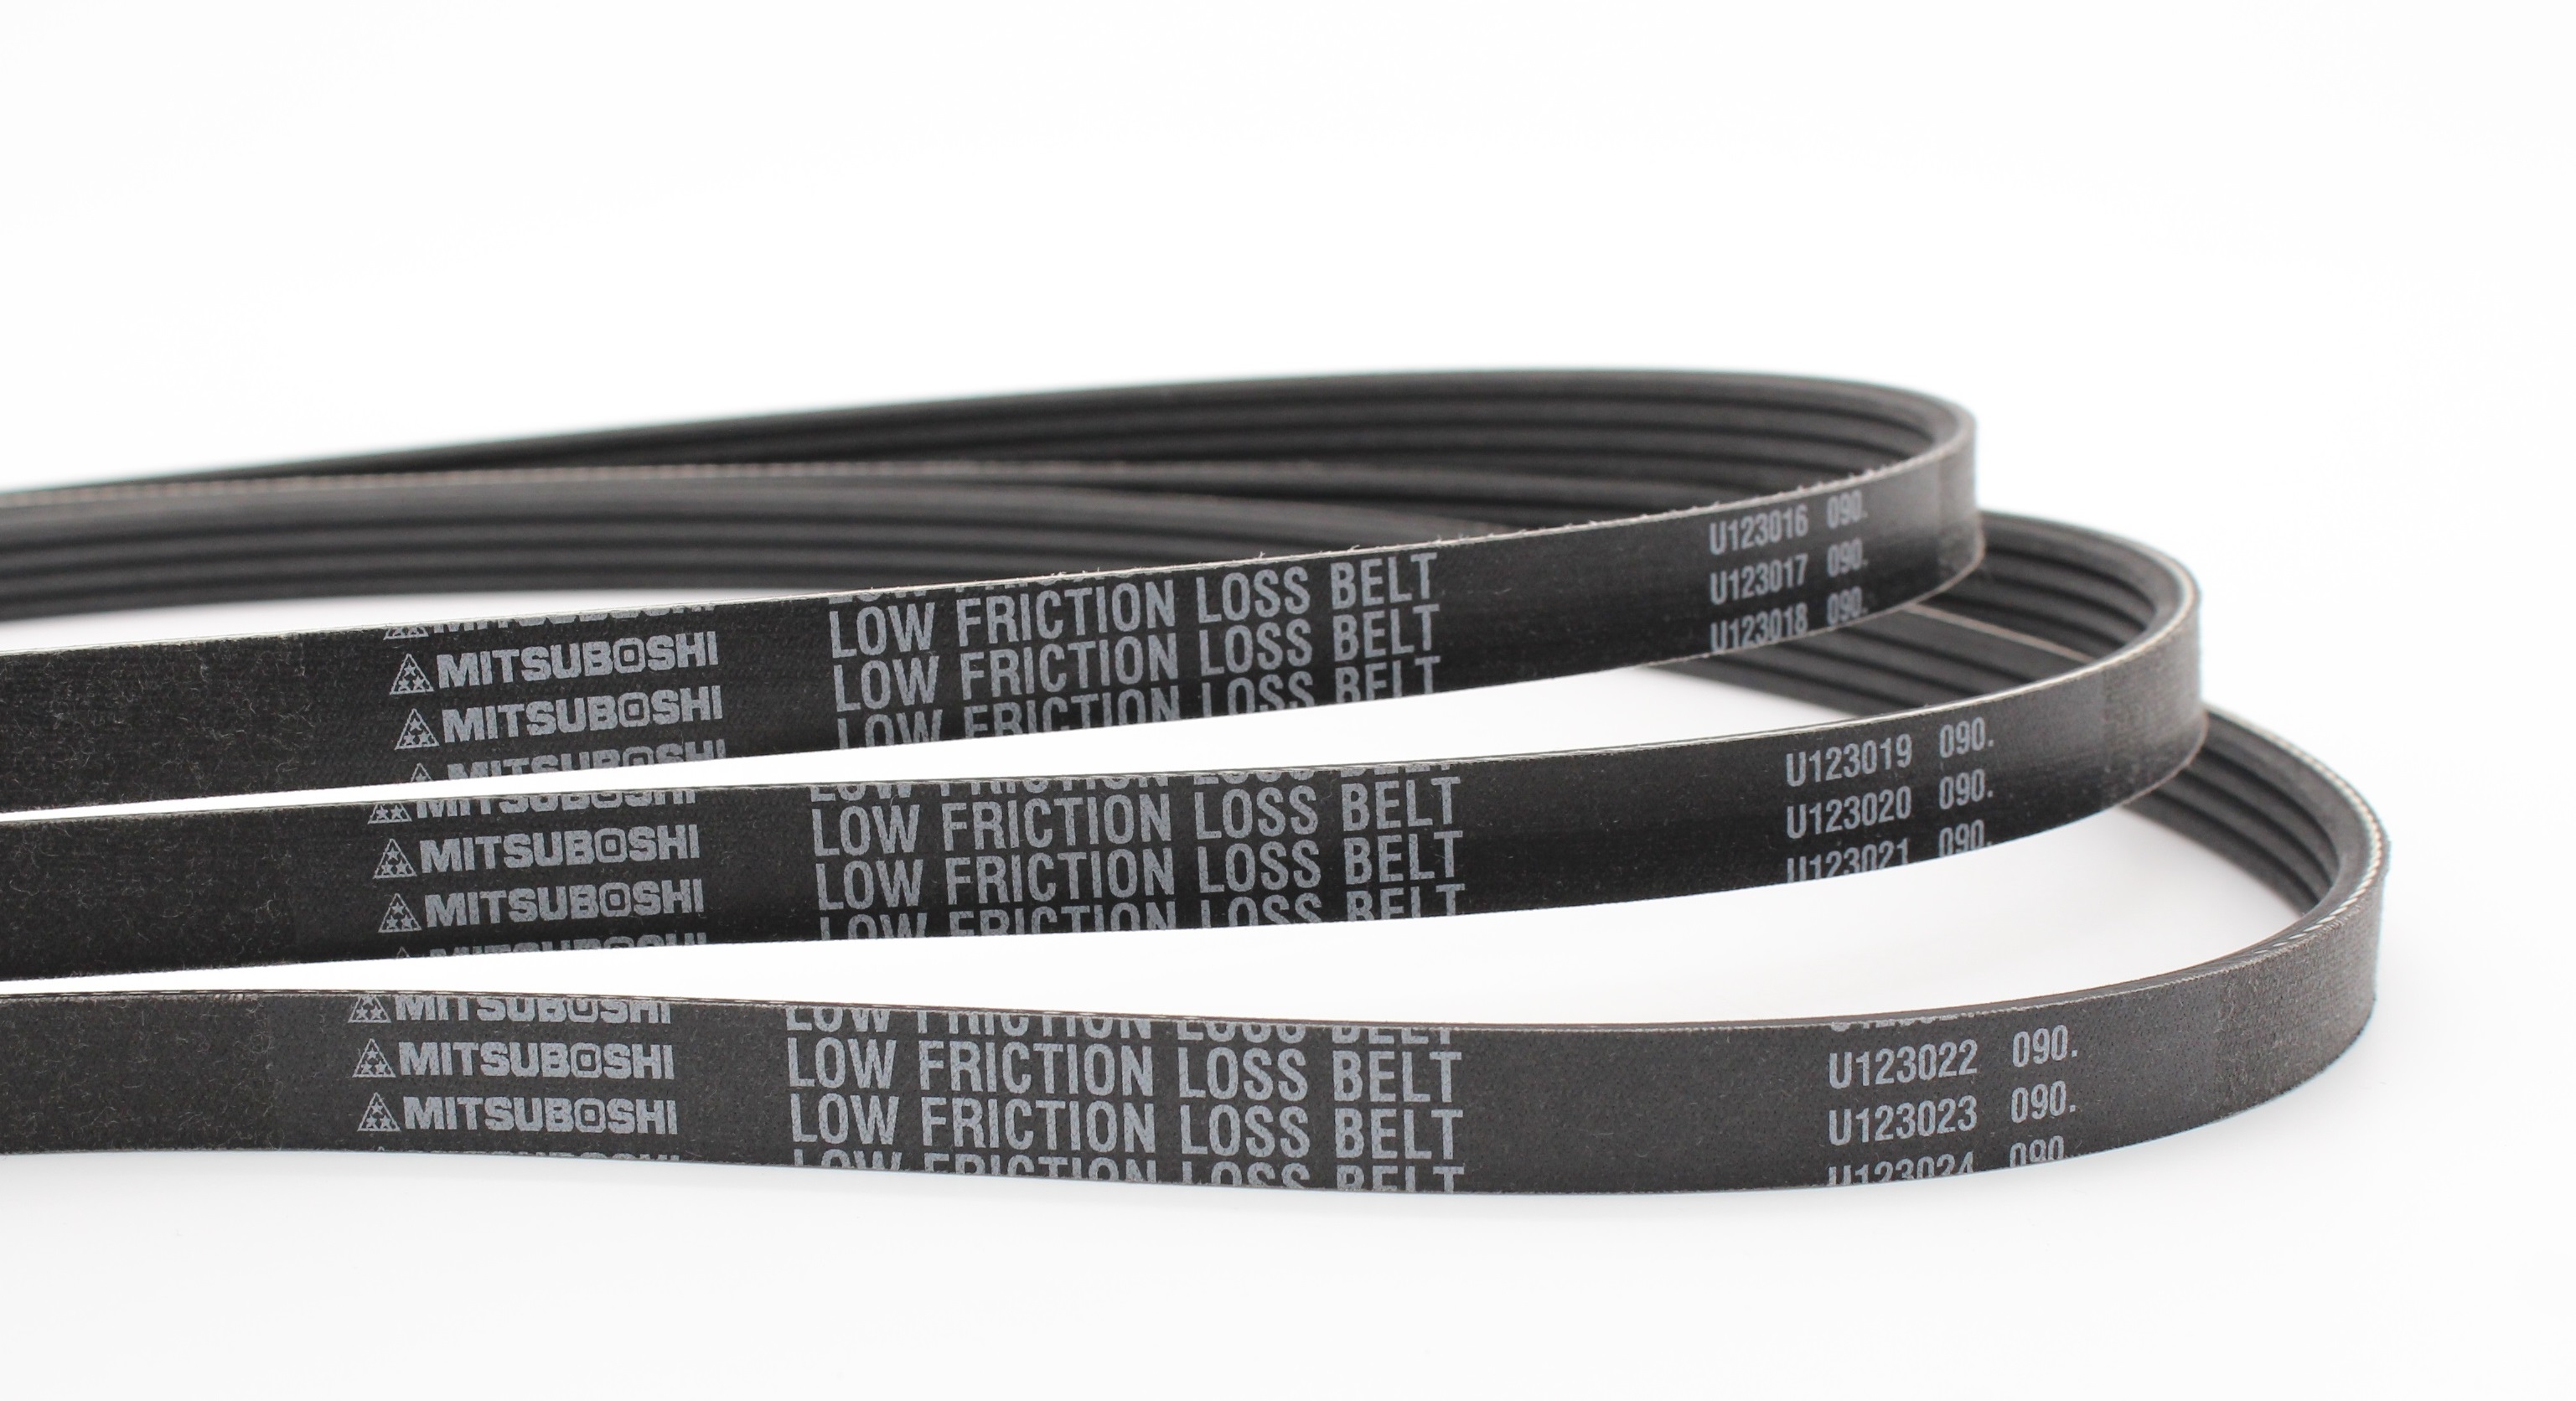 Low Friction Loss Belts